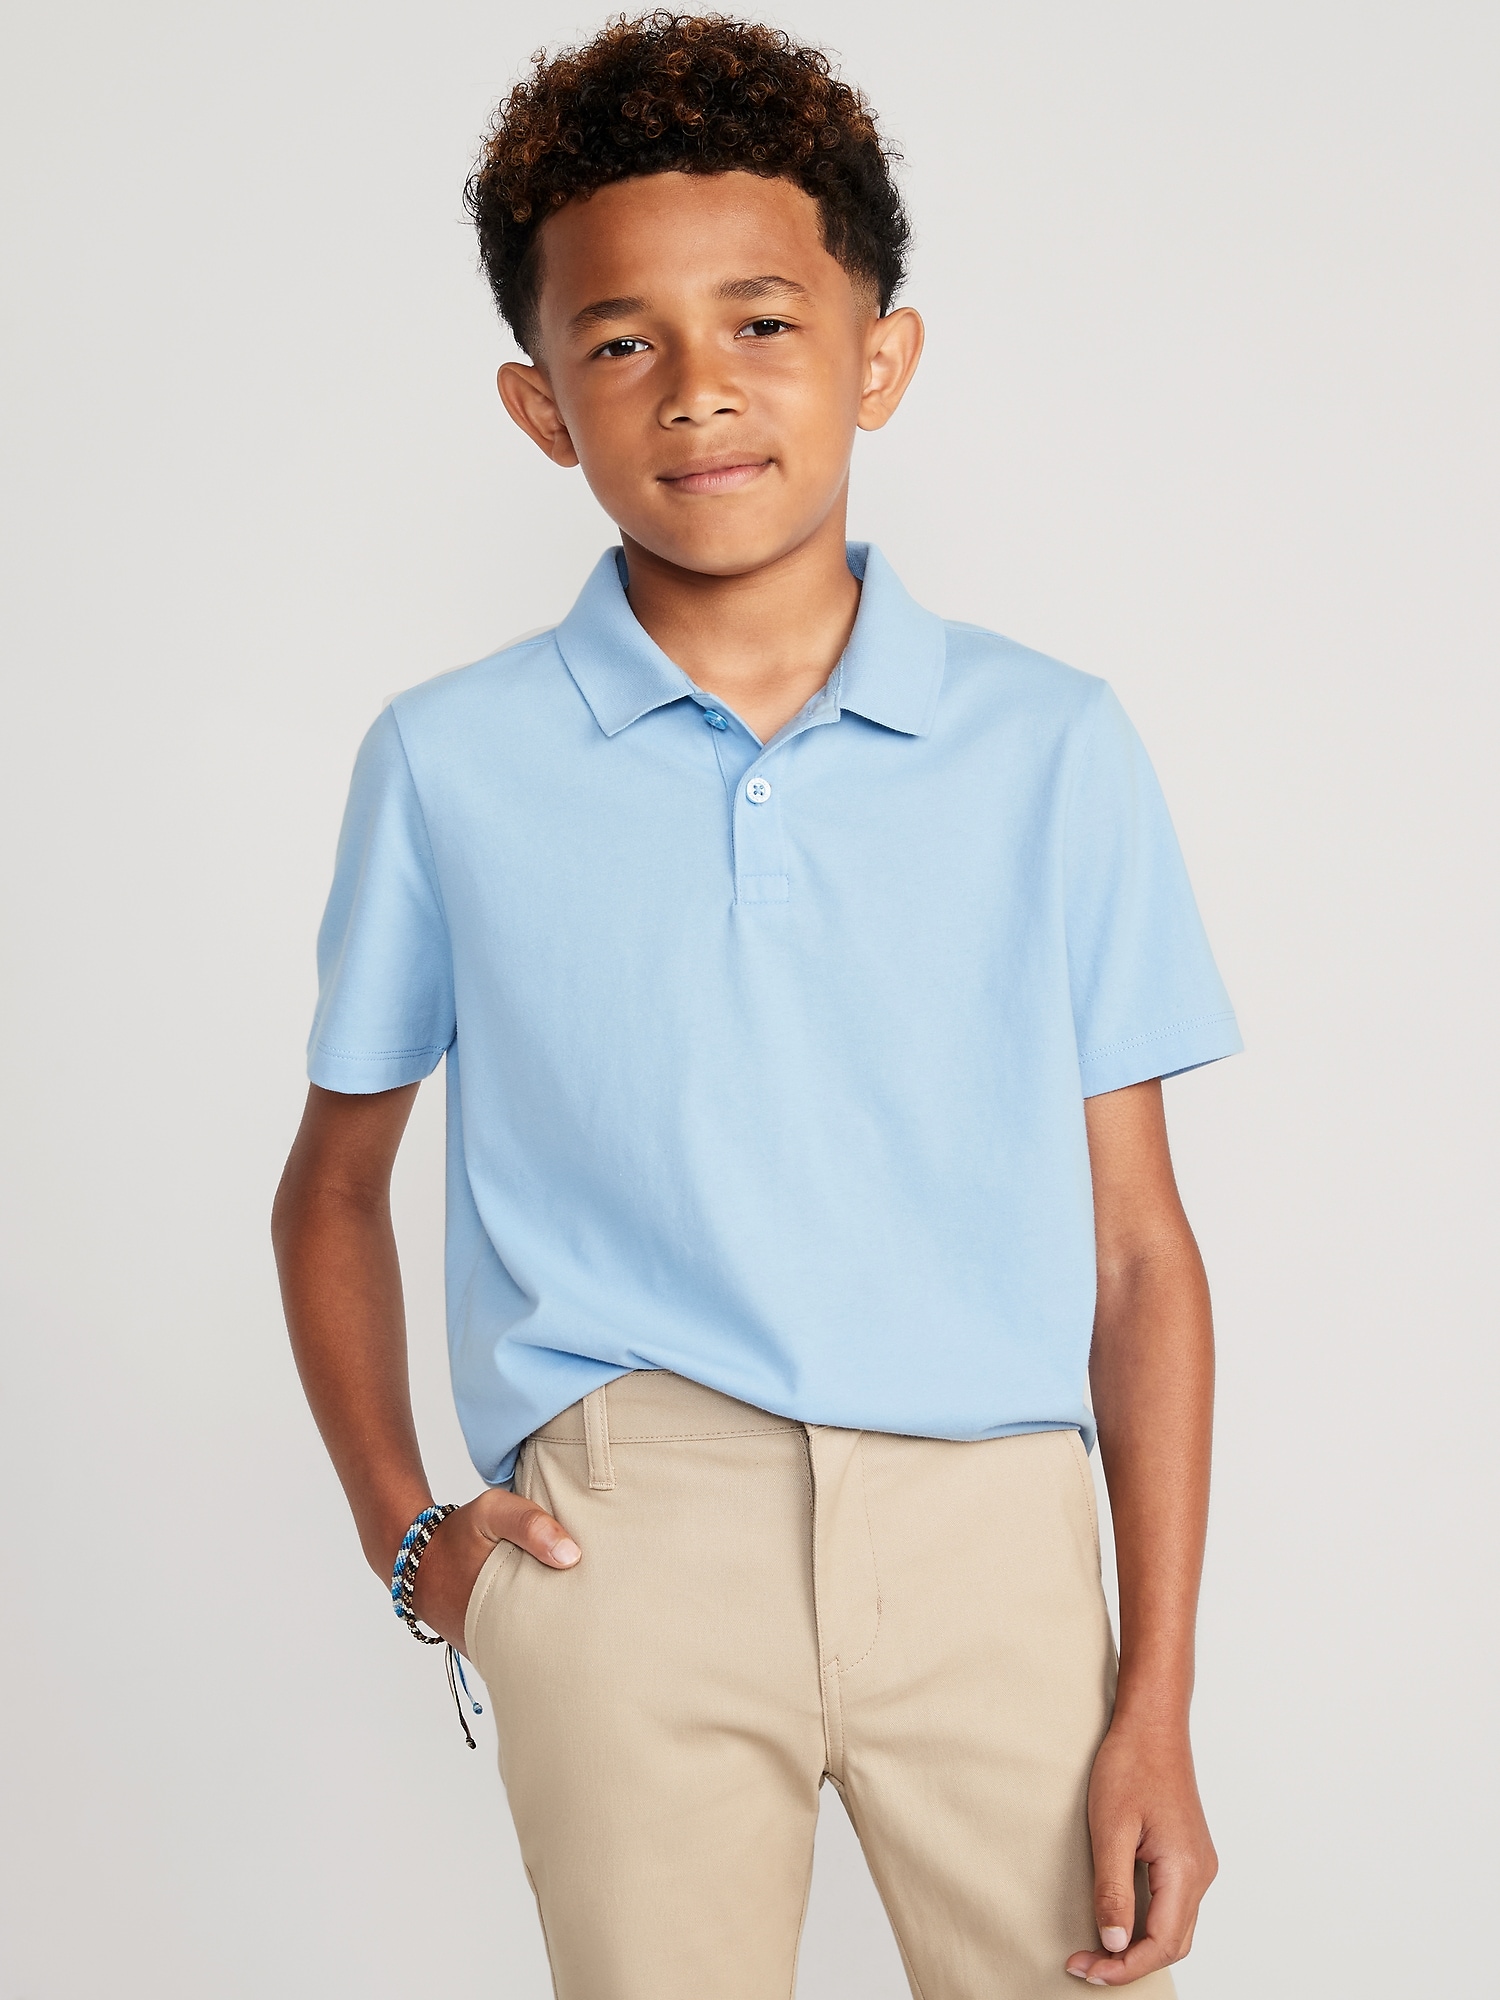 death turtle vision School Uniform Jersey-Knit Polo Shirt for Boys | Old Navy